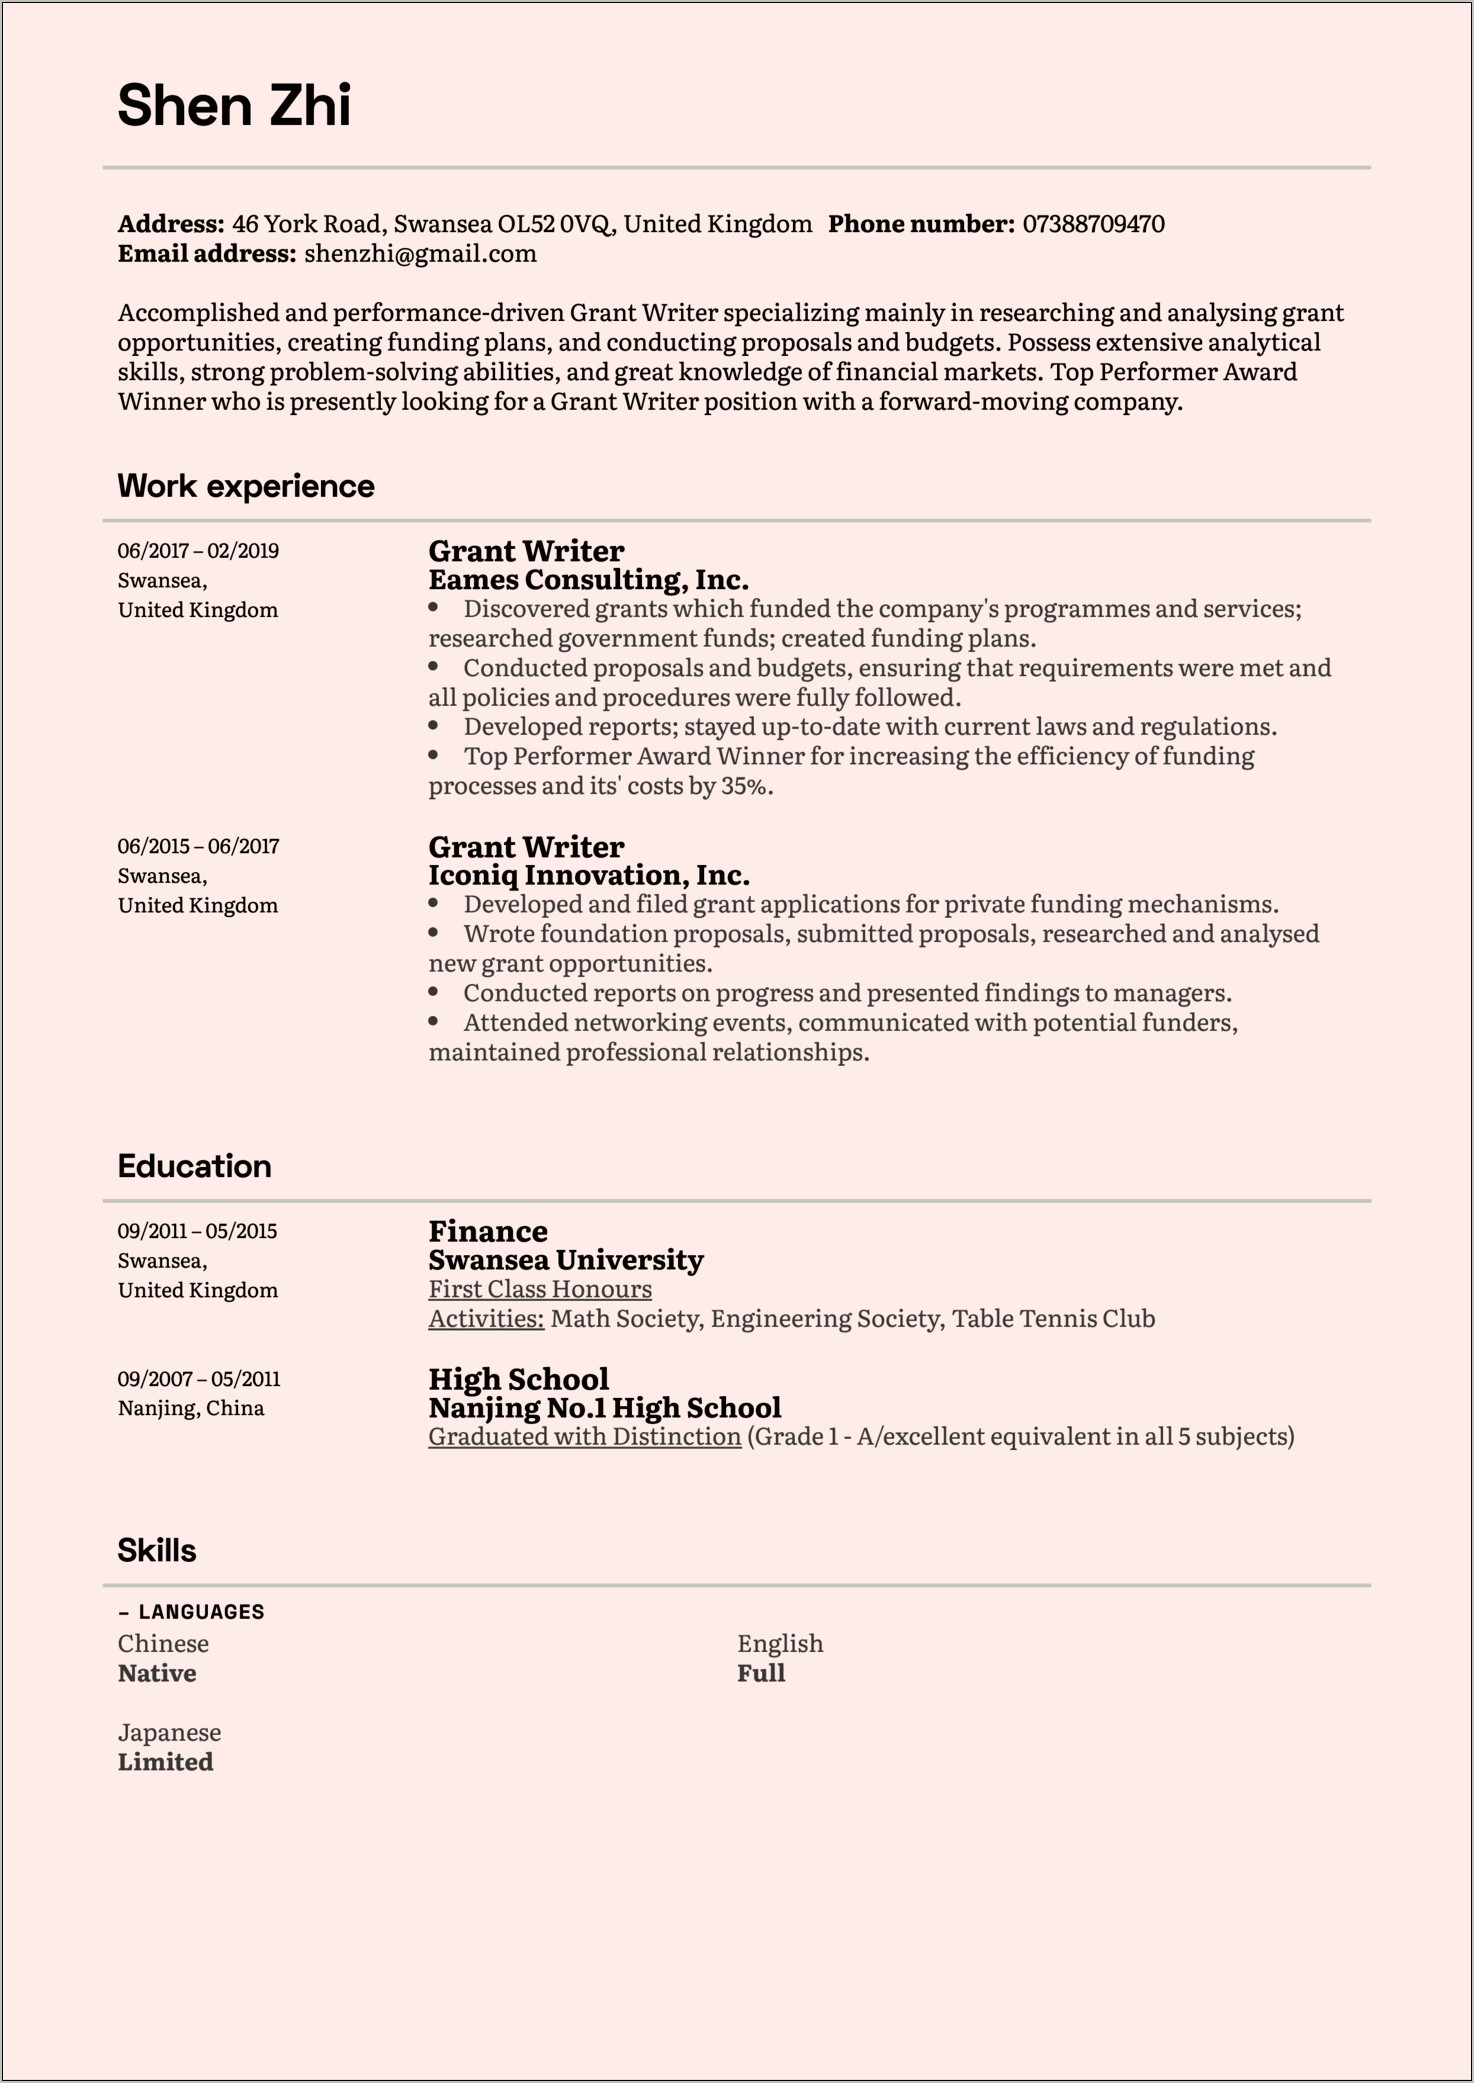 Honors And Activities In Resume Sample